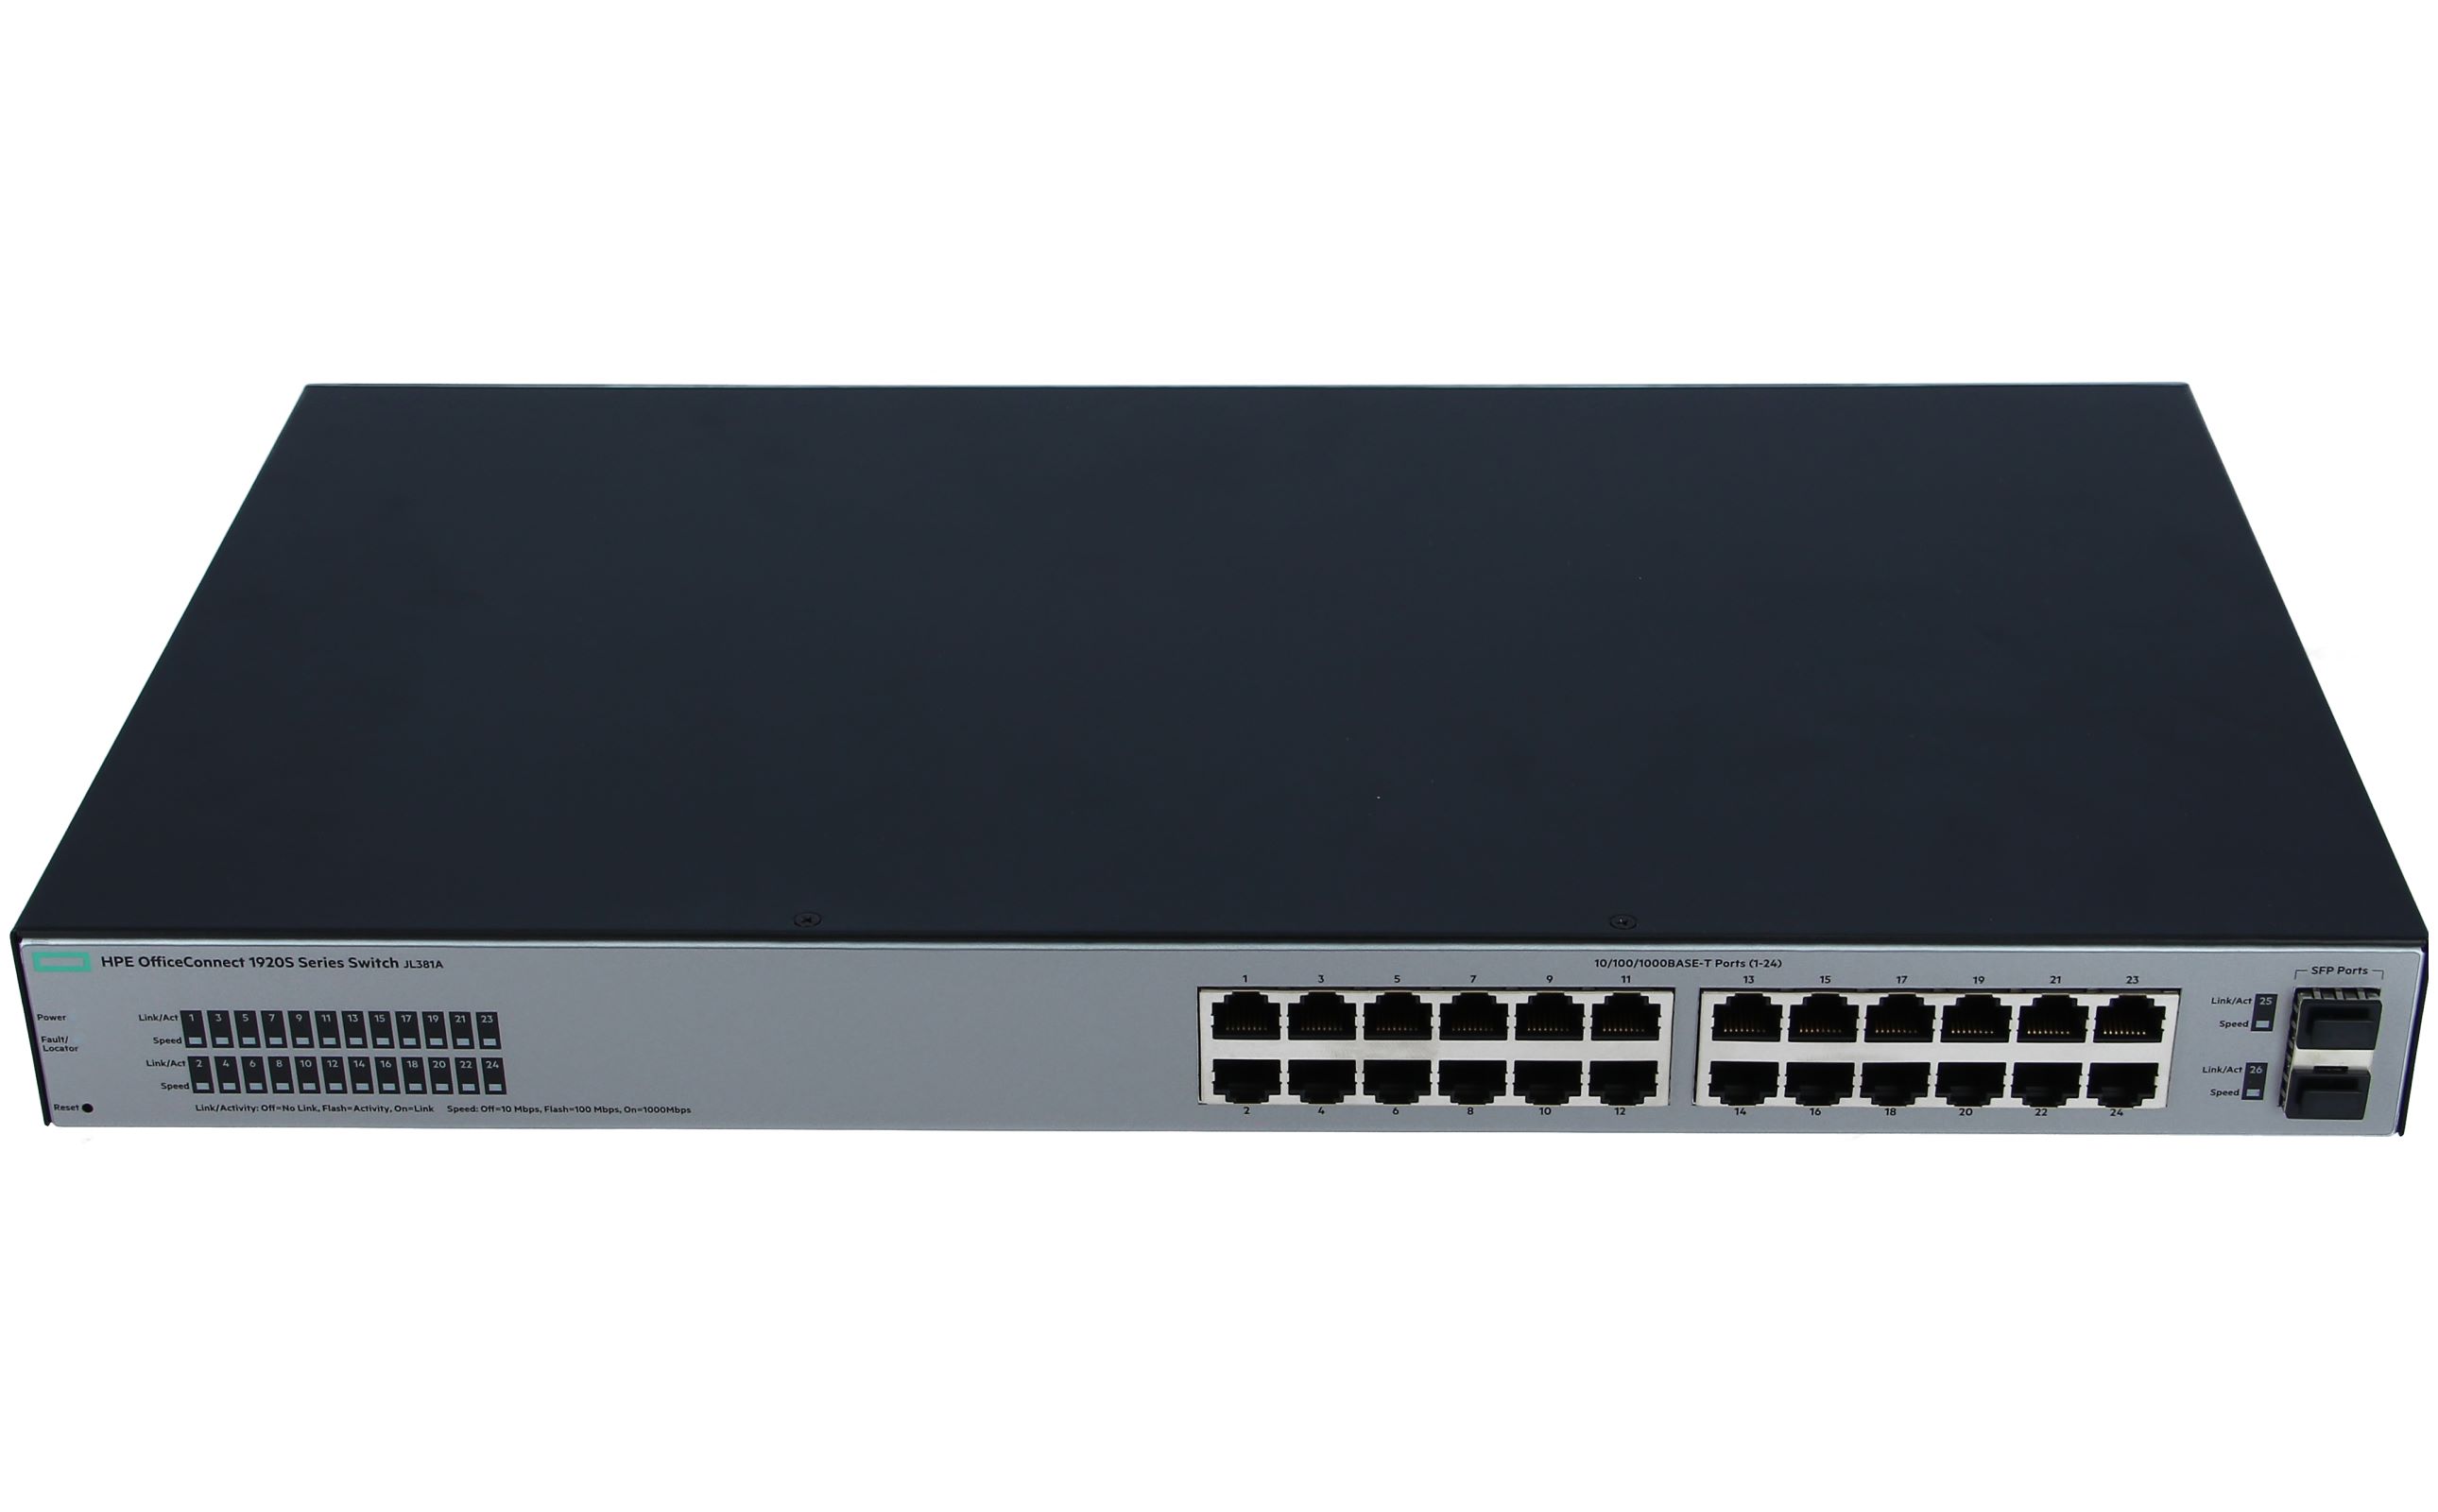 HP - JL381A#ABB - OfficeConnect 1920S 24G 2SFP - Switch  Mbps -  24-Port - Rack-Modul new and refurbished buy online low prices